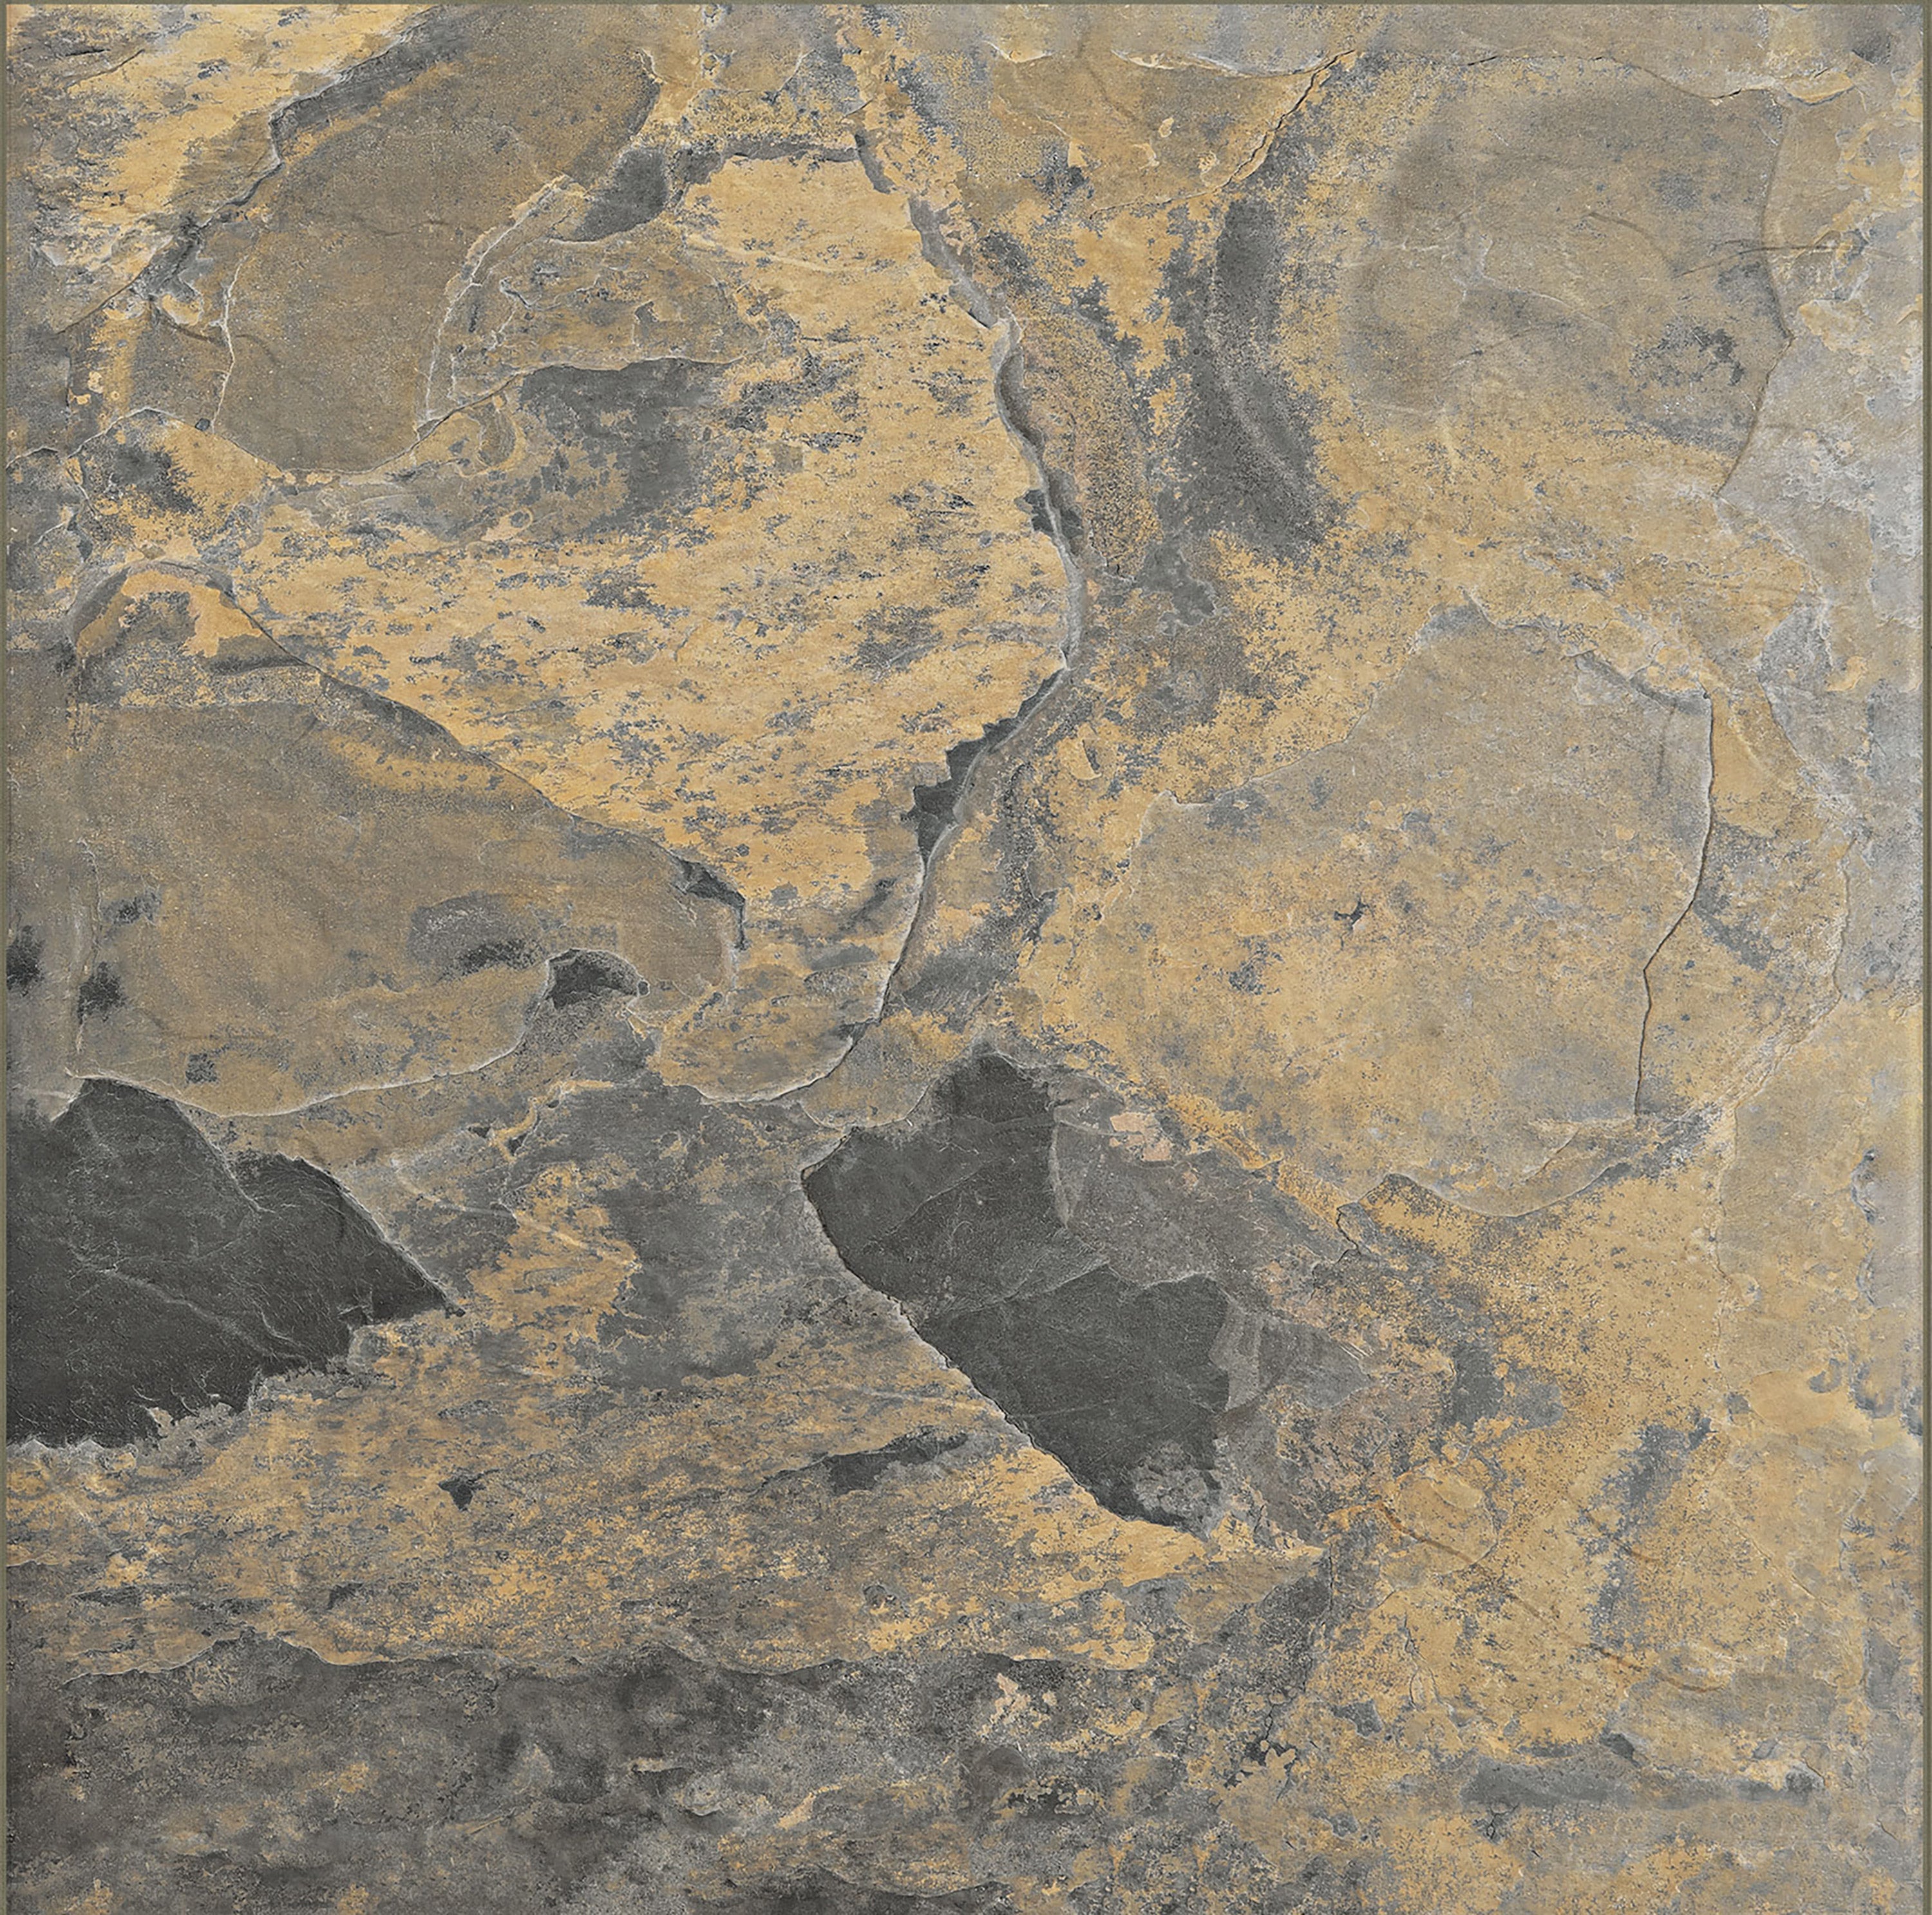 landmark frontier20 slate rustic gold paver tile 24x24x20mm matte rectified porcelain tile distributed by surface group international